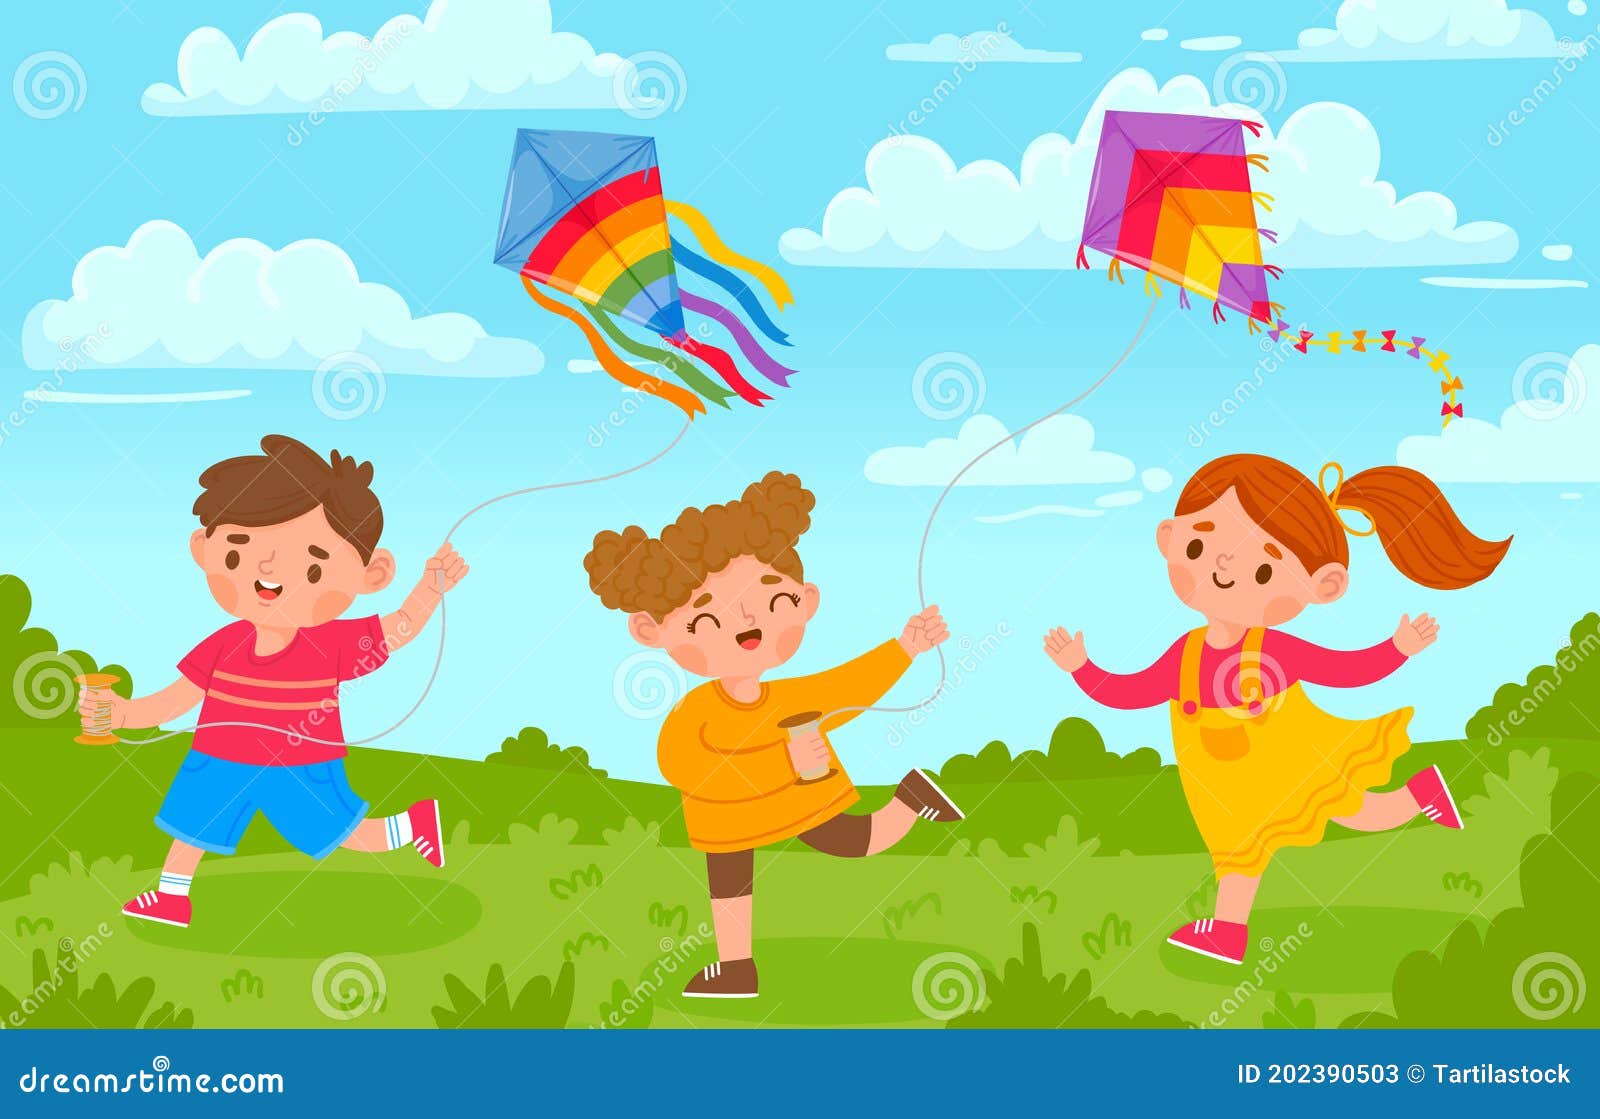 Kids With Kites Boy And Girl Outside Playing With Flying Toy In Park